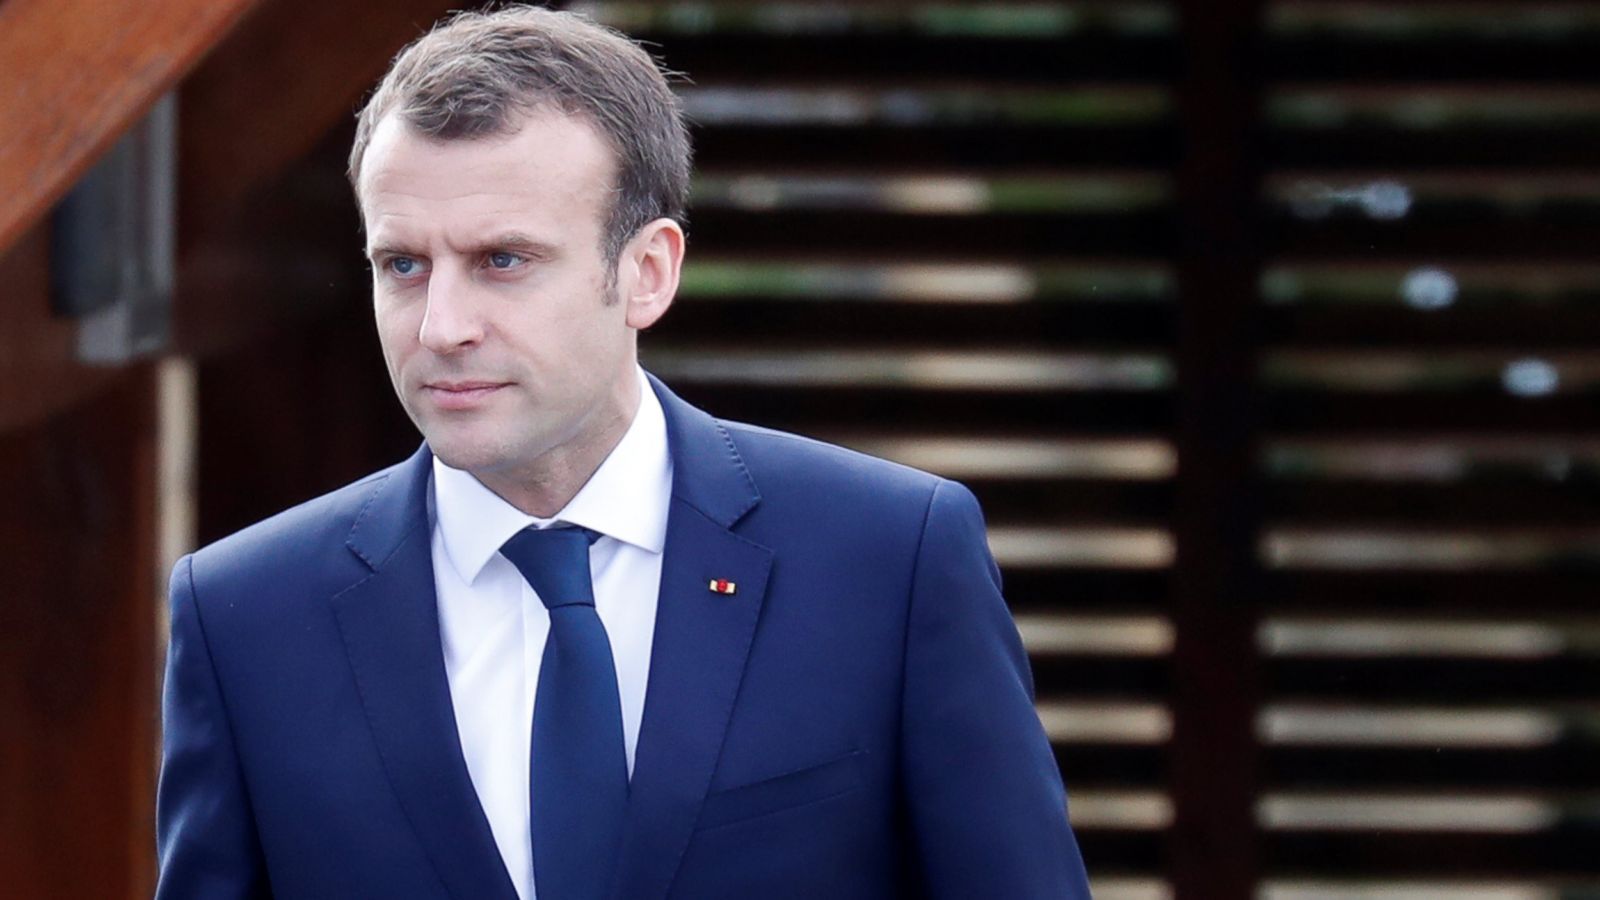 We have the proof' Syria used chemical weapons, French President Emmanuel Macron says